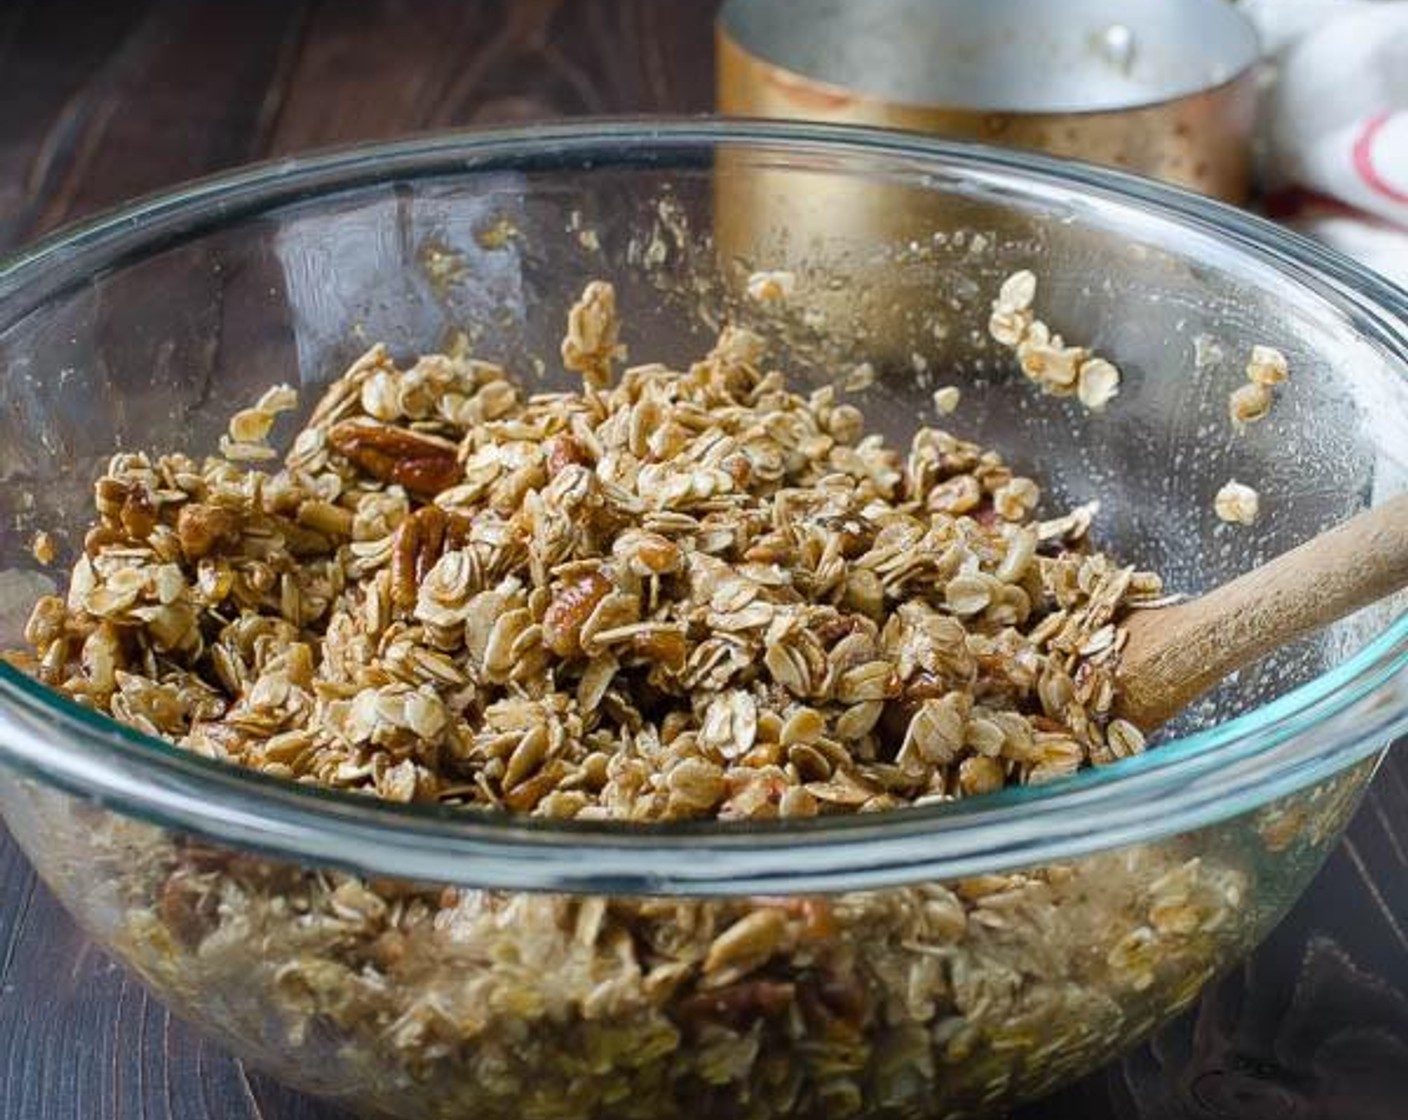 step 4 Divide the granola between the two sheet pans and spread into a single layer. Bake for 10 minutes, stir the granola, spread out into a single layer and bake for another 10 minutes, until golden and fragrant.